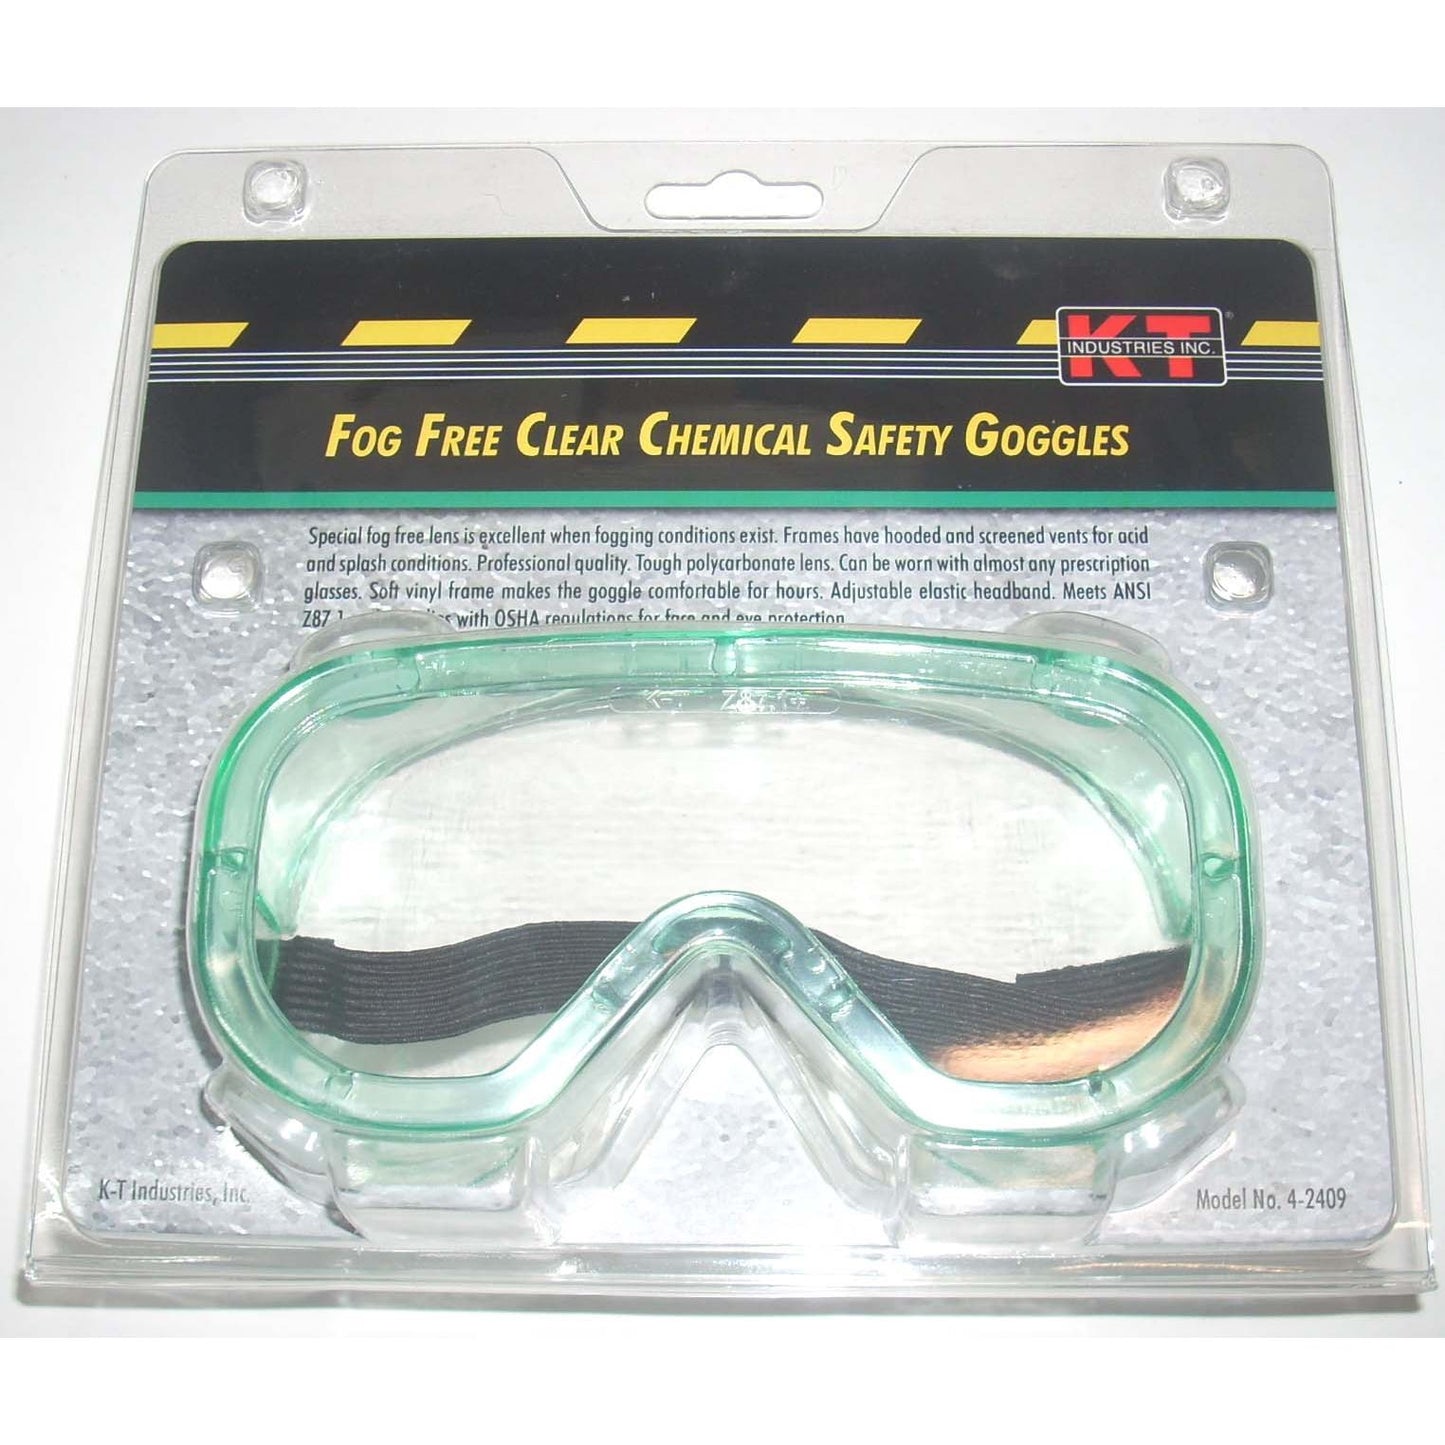 KT Industries 4-2409 Fog Free Chemical Safety Goggles